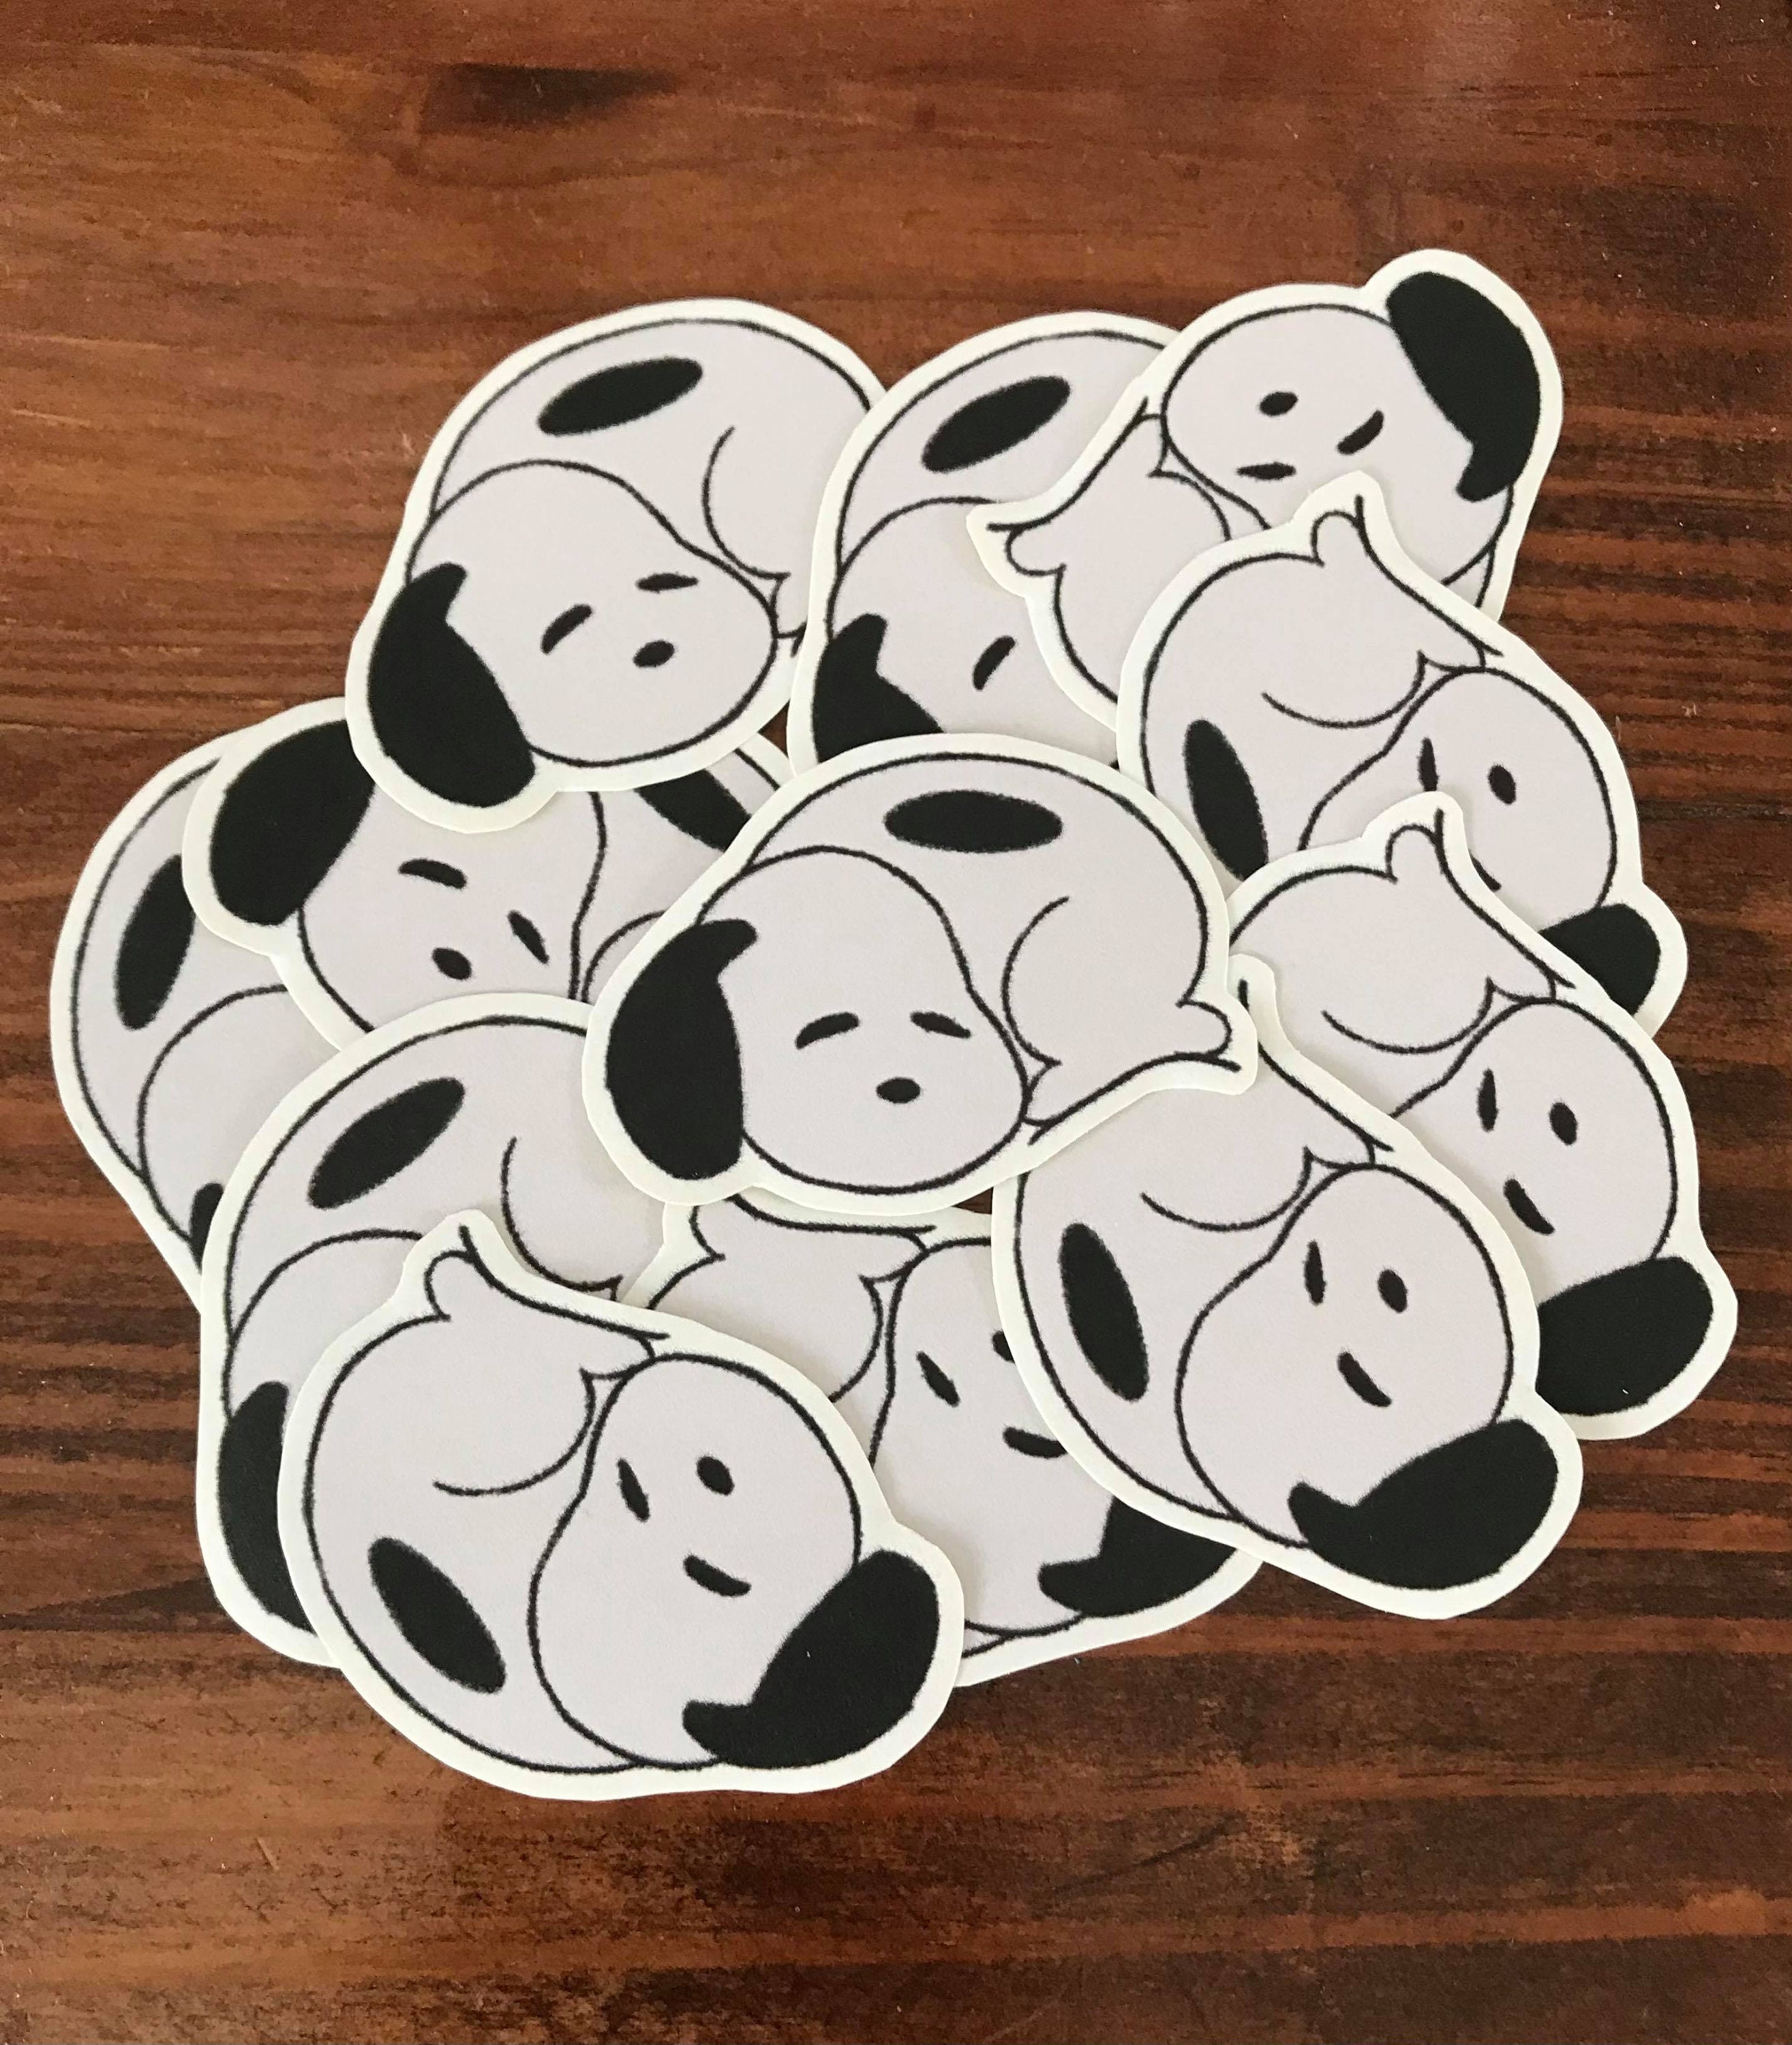 Buy Baby Snoopy Sticker Online in India 